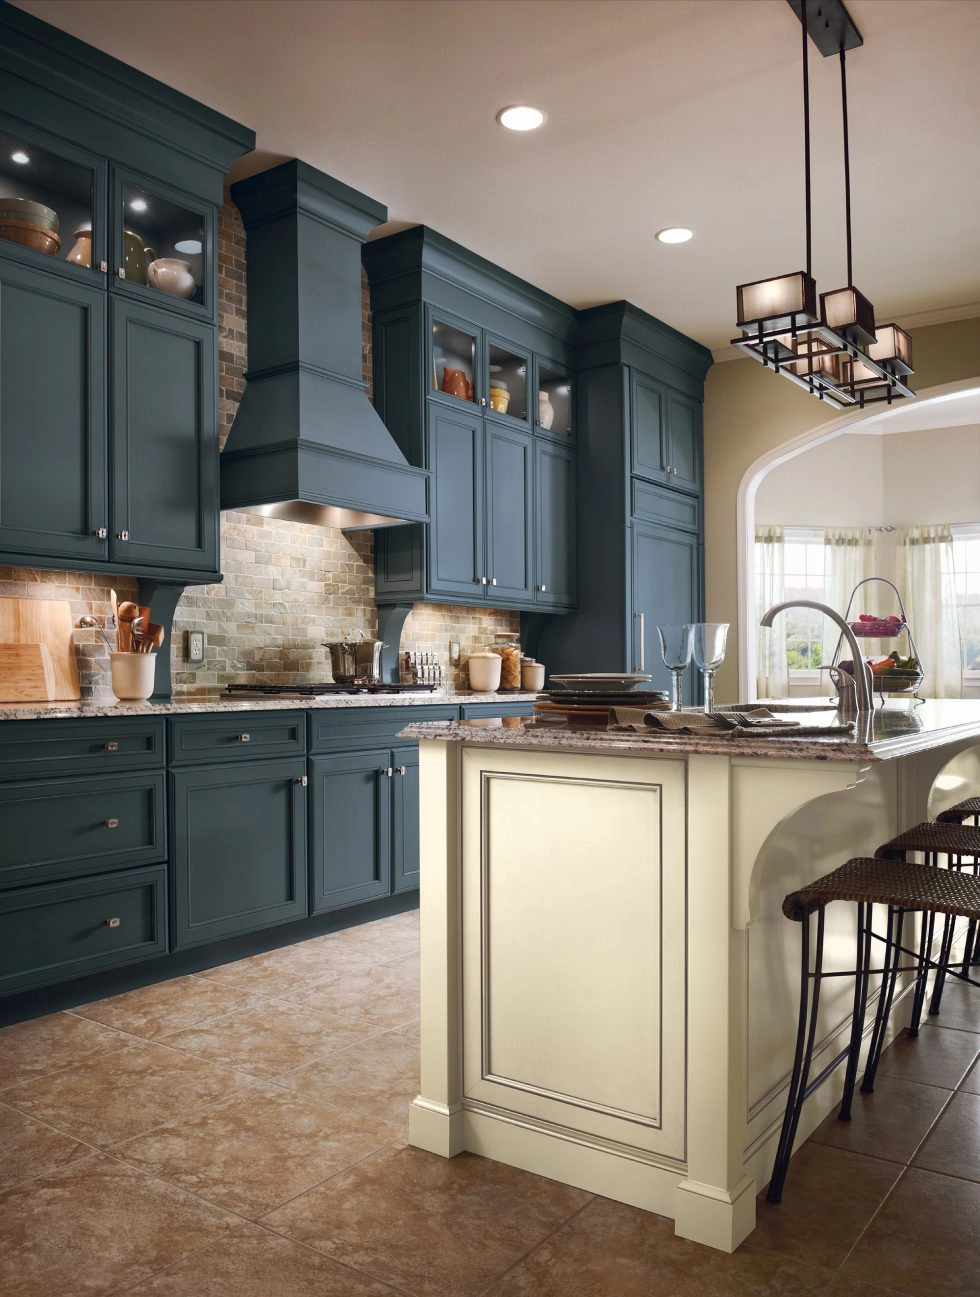 kraftmaid Cabinets for Your Top Class Kitchen